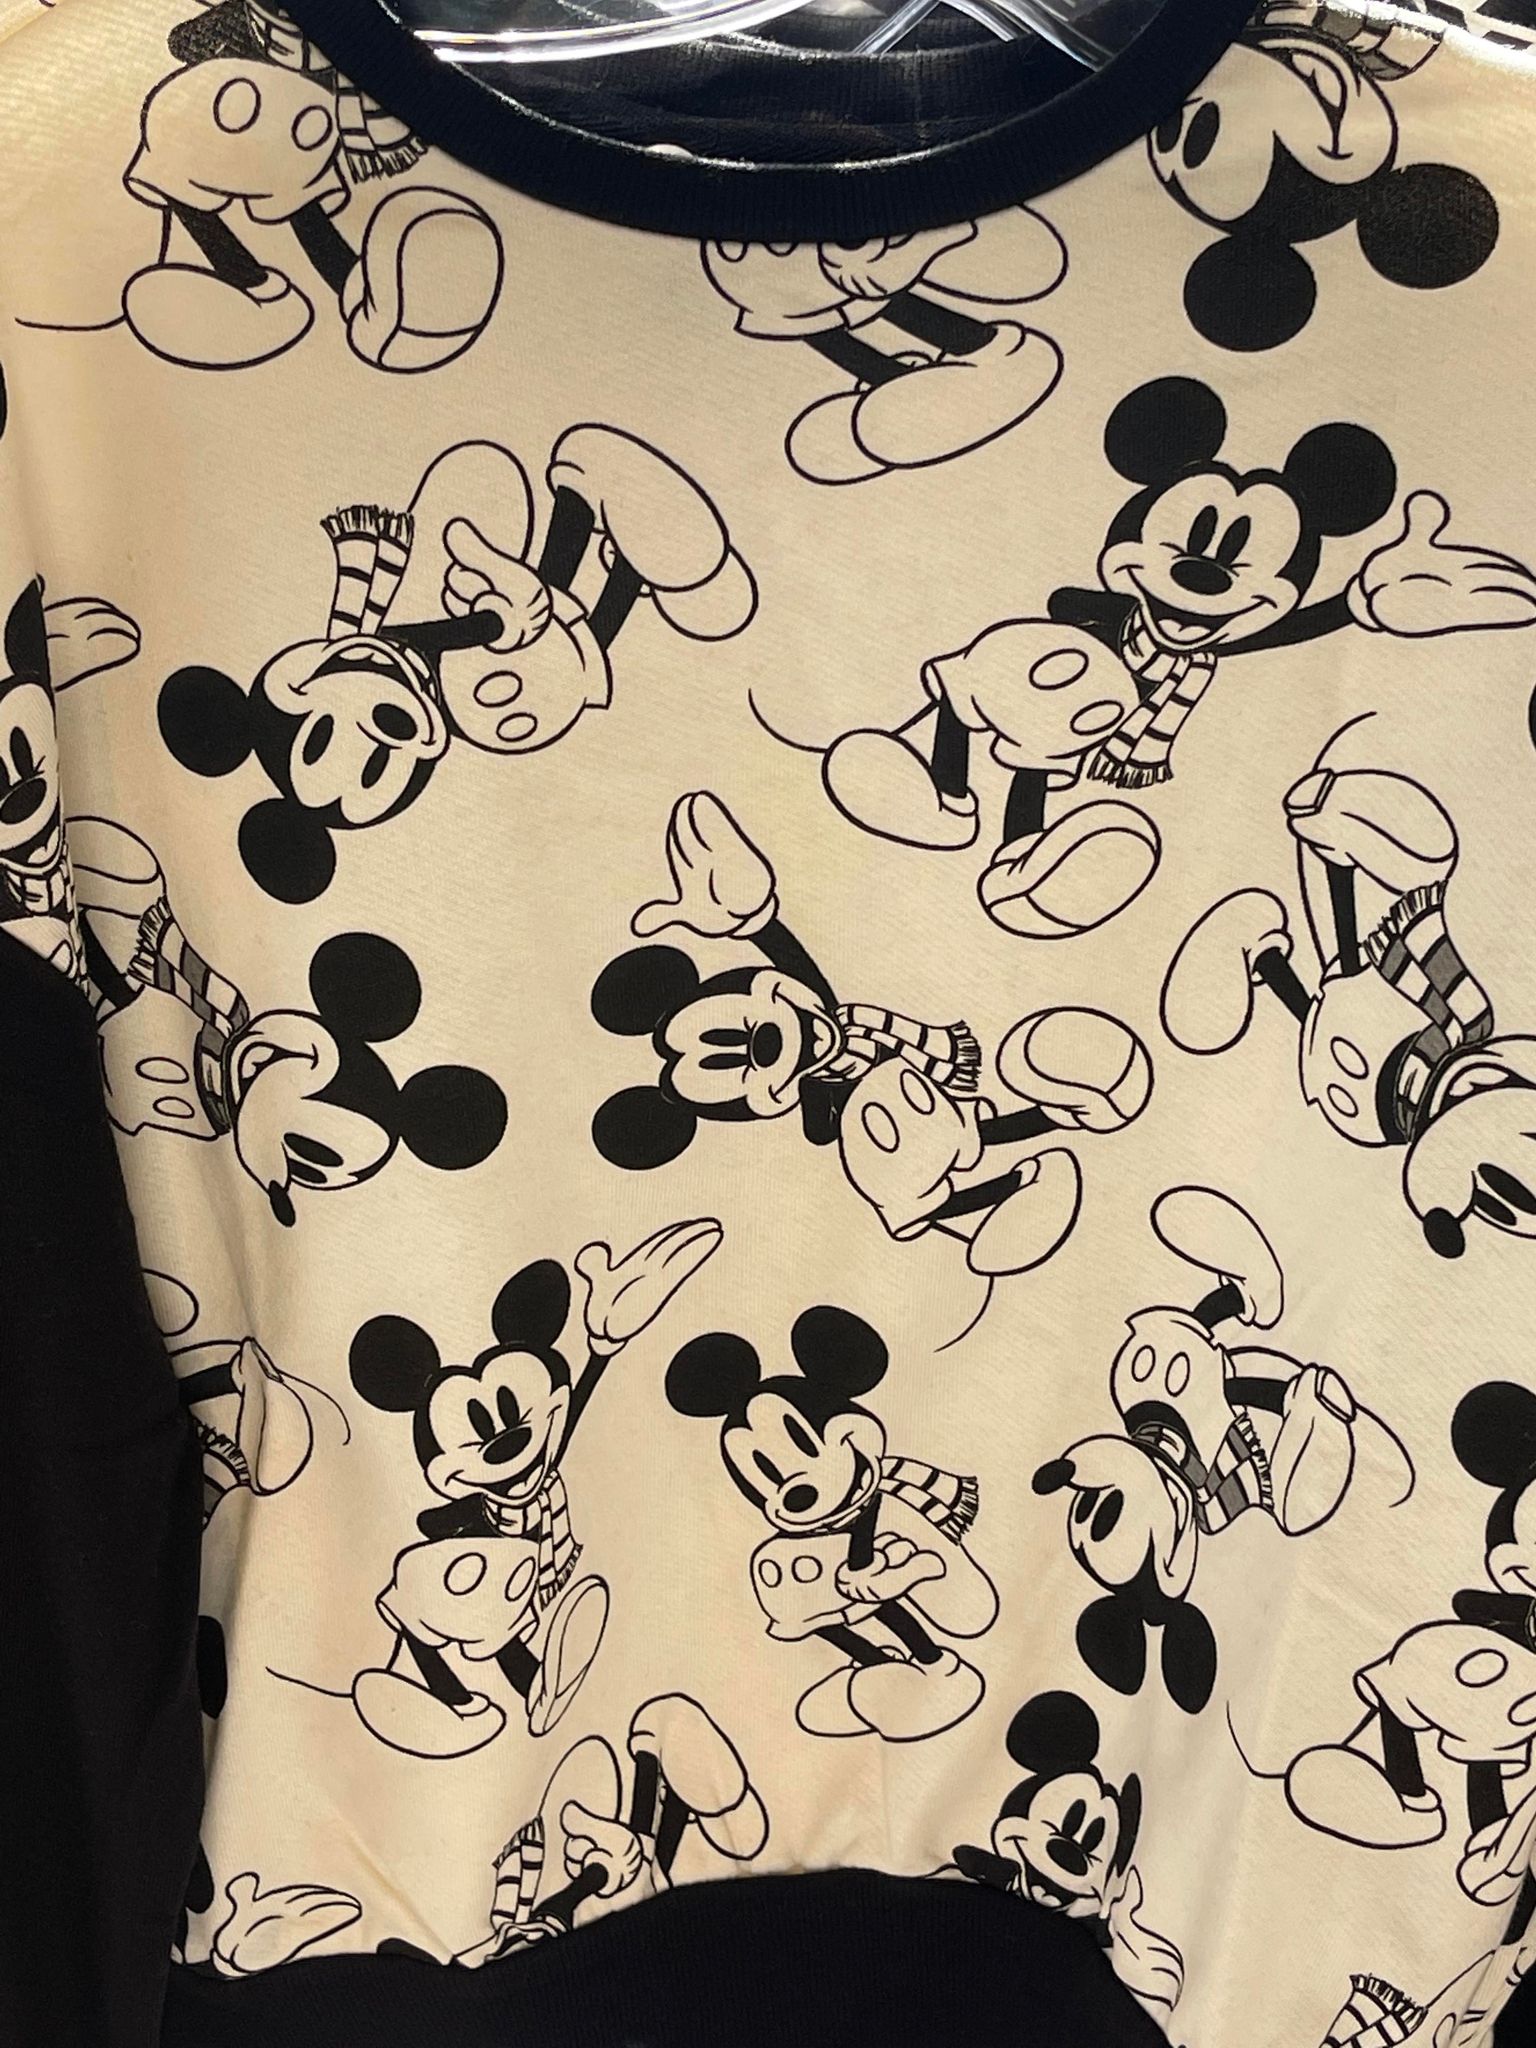 This Cool New Mickey Sweatshirt is Stylish and Sporty - MickeyBlog.com